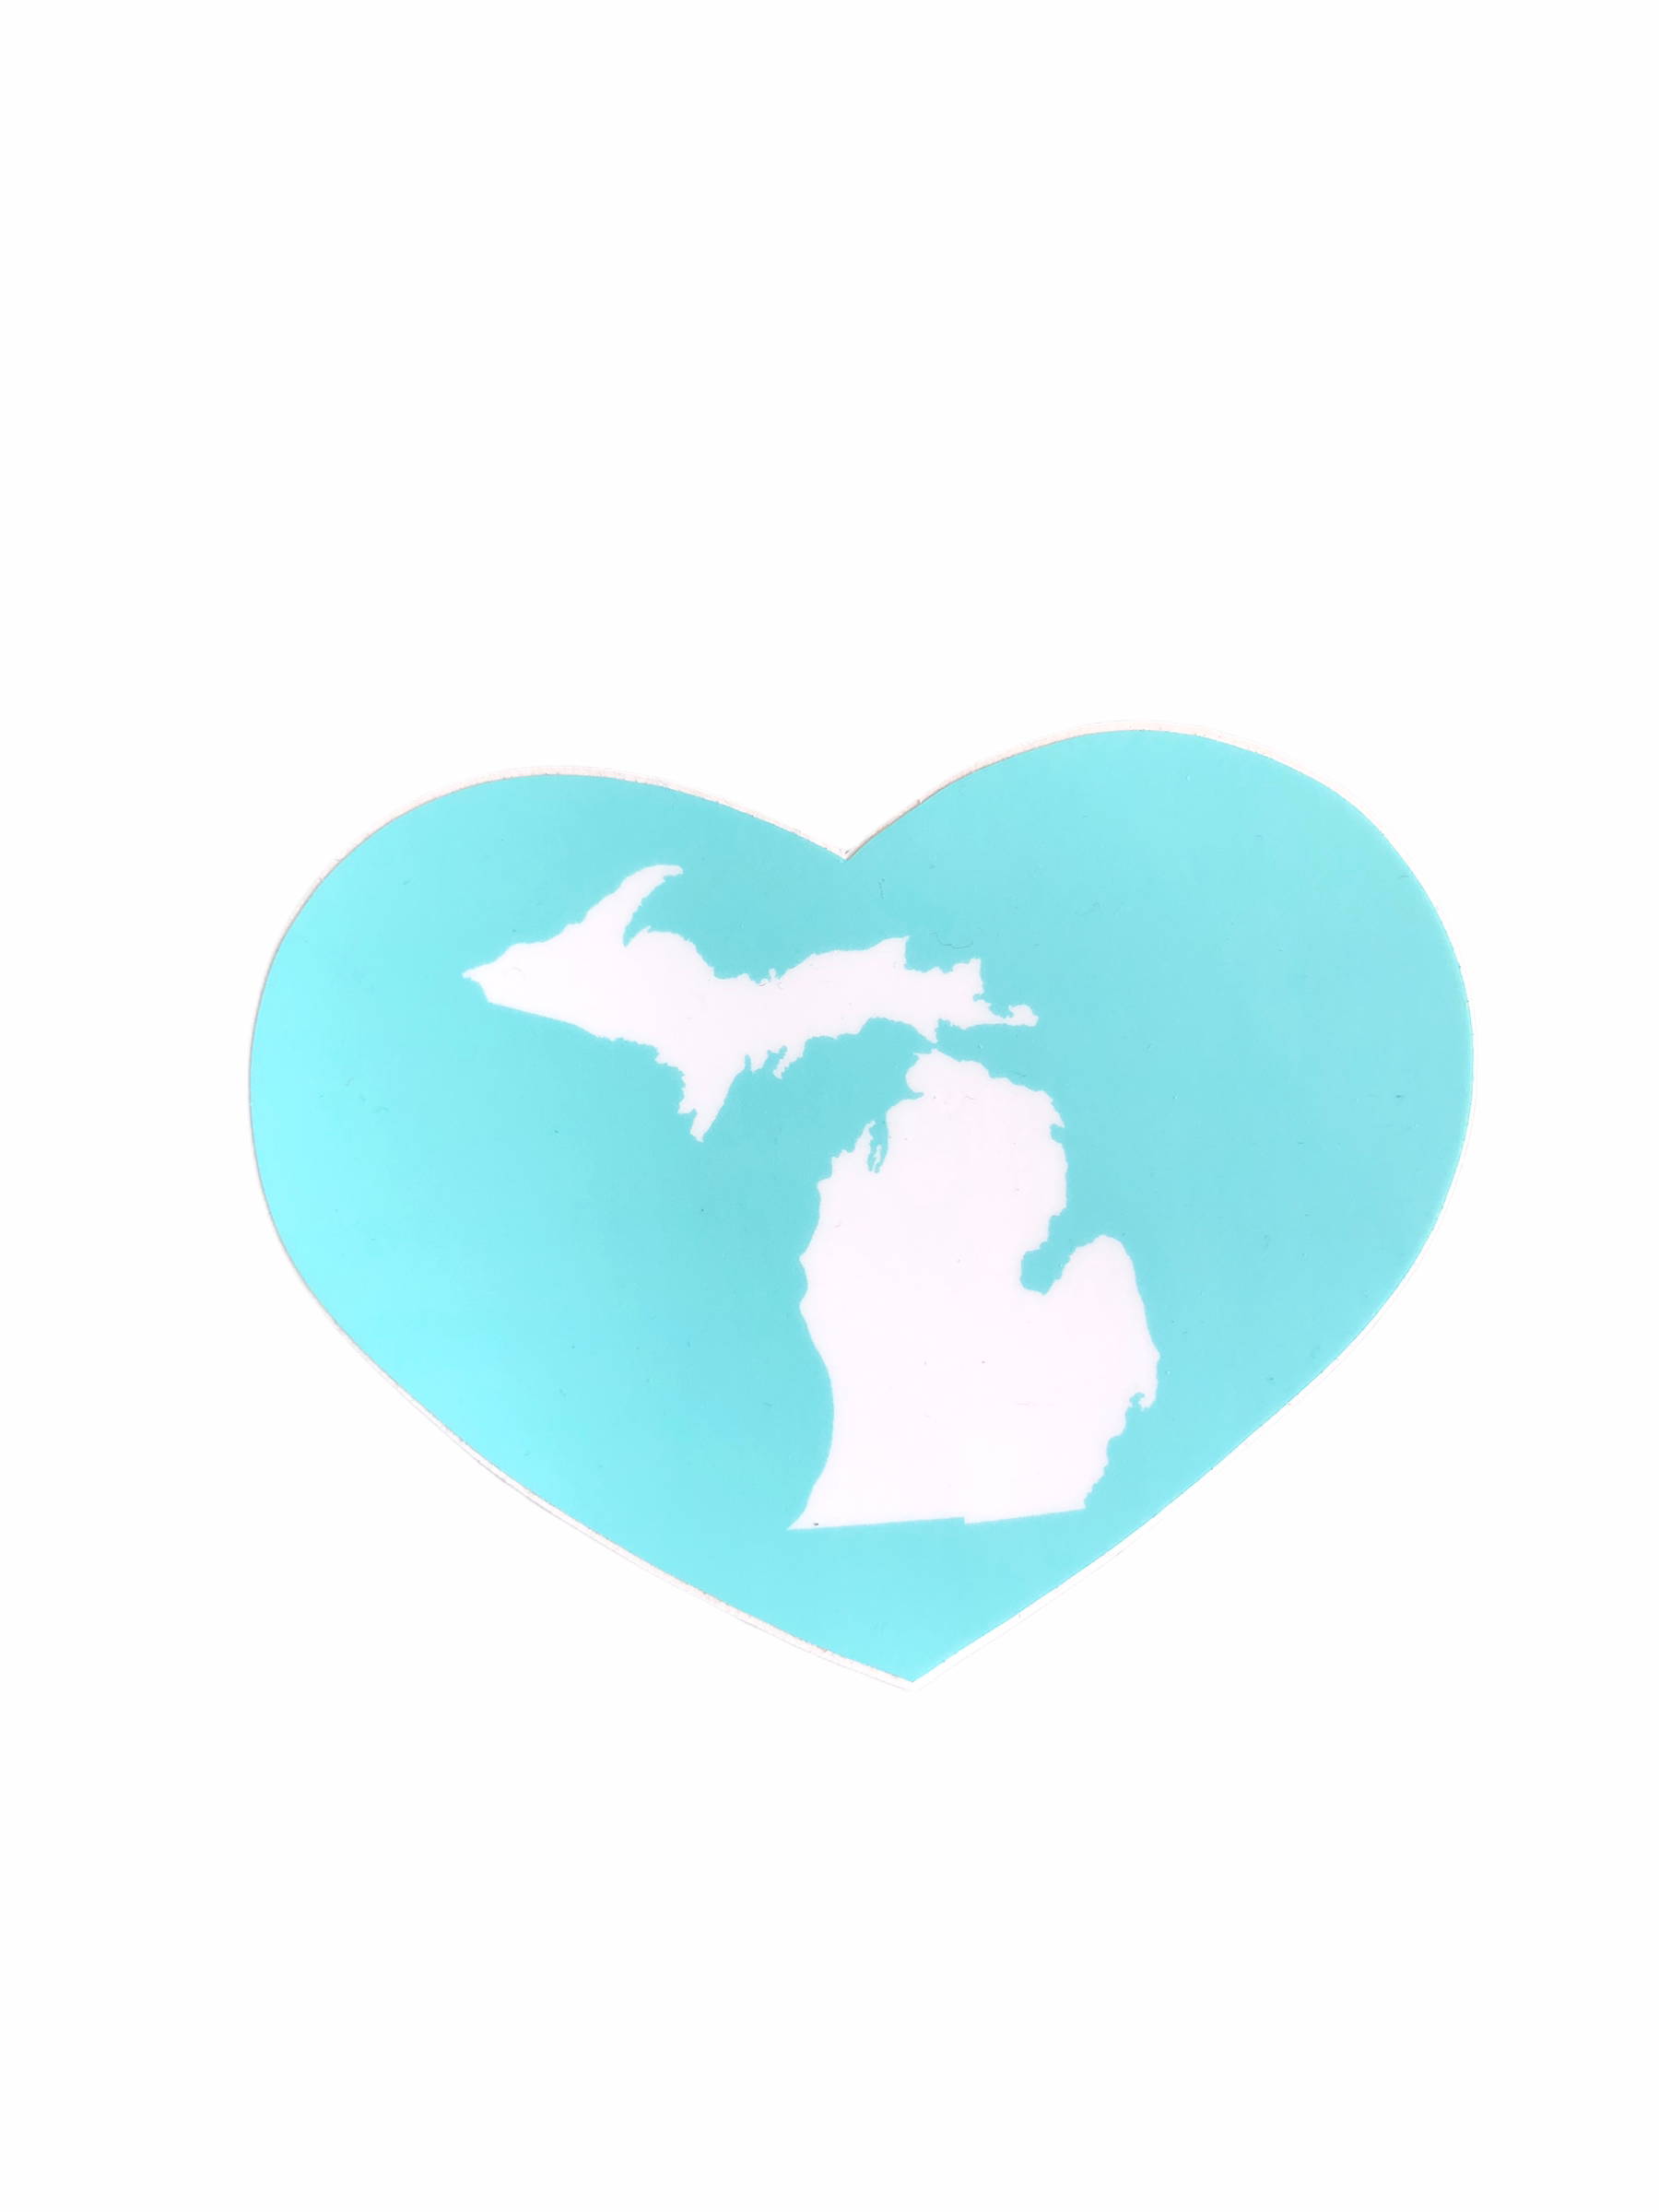 Enjoy Michigan Great Lakes Heart Decal / Turquoise Decal   